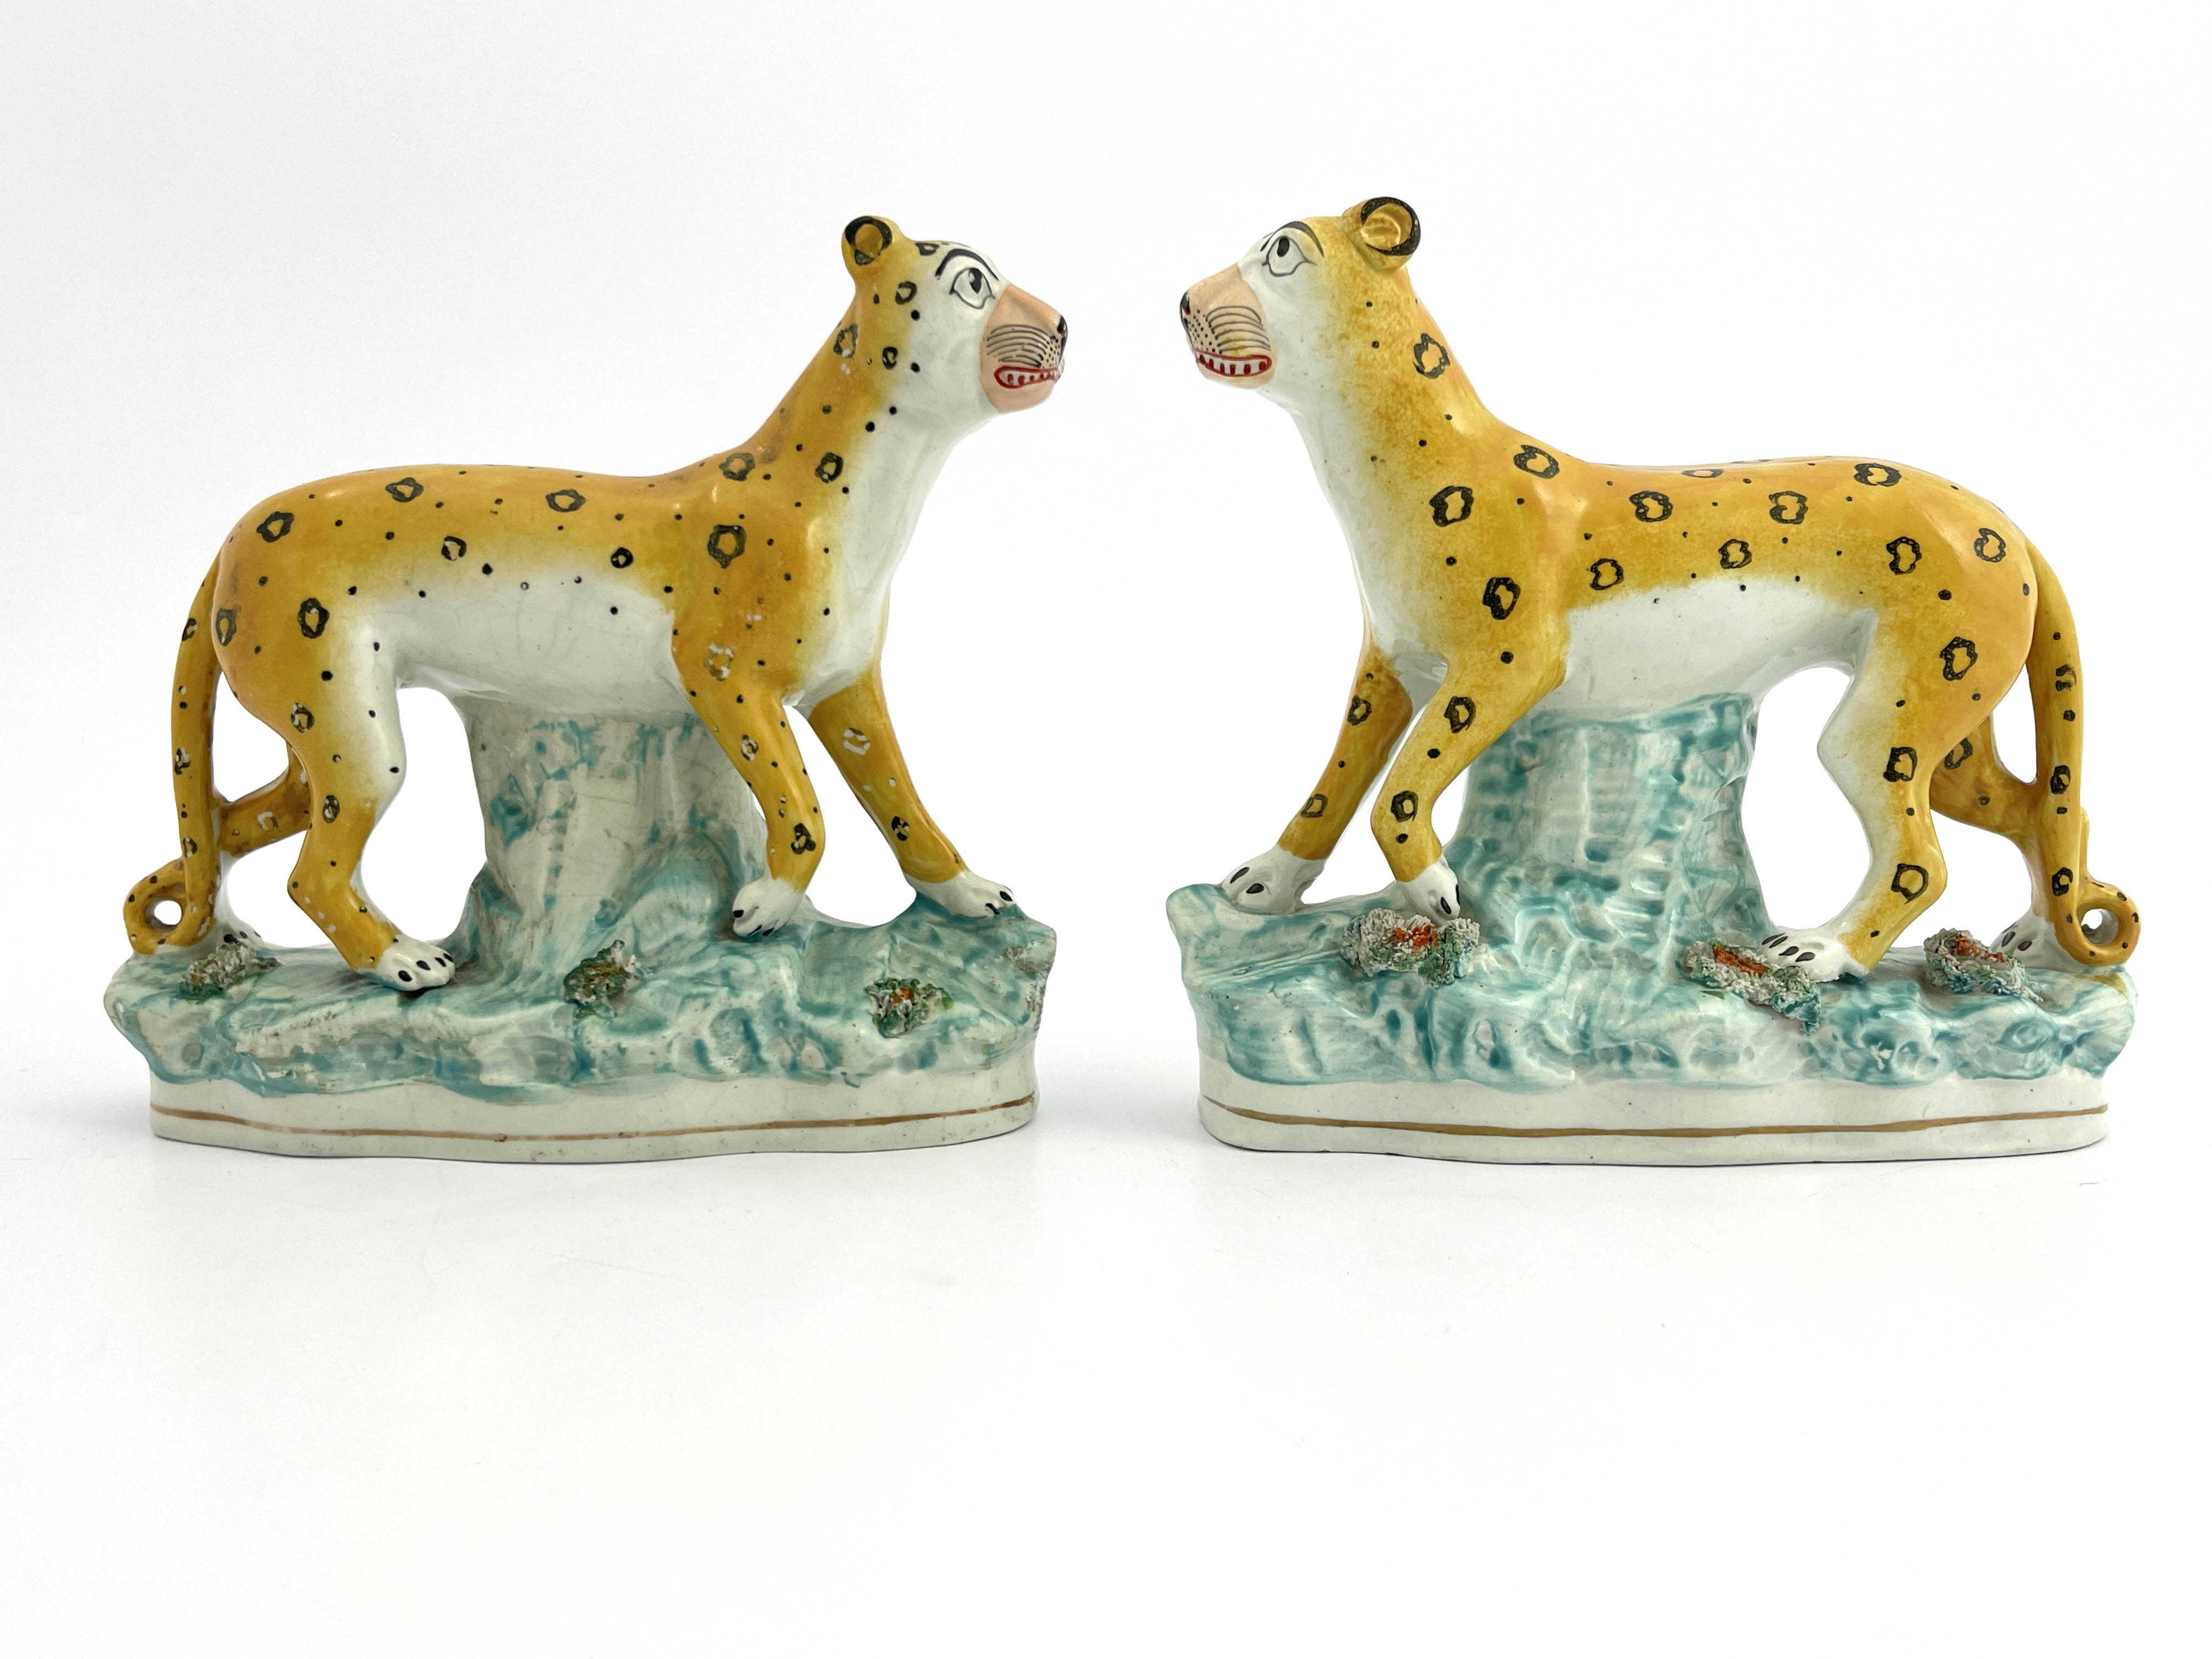 A rare pair of 19th Century Staffordshire pottery leopards, modelled strolling and decorated in